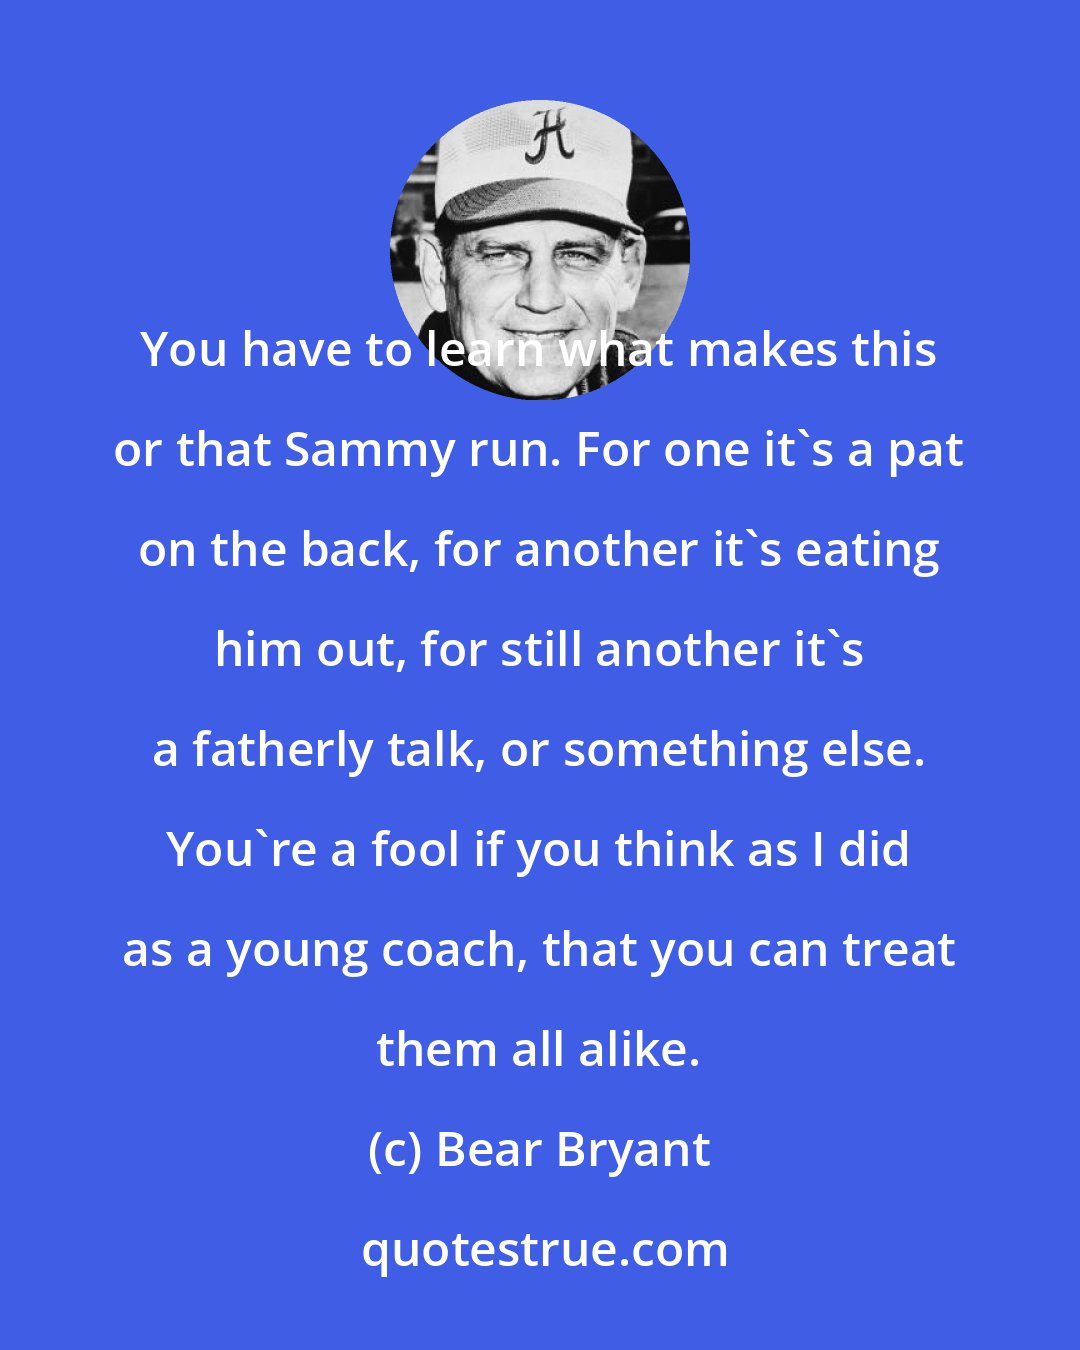 Bear Bryant: You have to learn what makes this or that Sammy run. For one it's a pat on the back, for another it's eating him out, for still another it's a fatherly talk, or something else. You're a fool if you think as I did as a young coach, that you can treat them all alike.